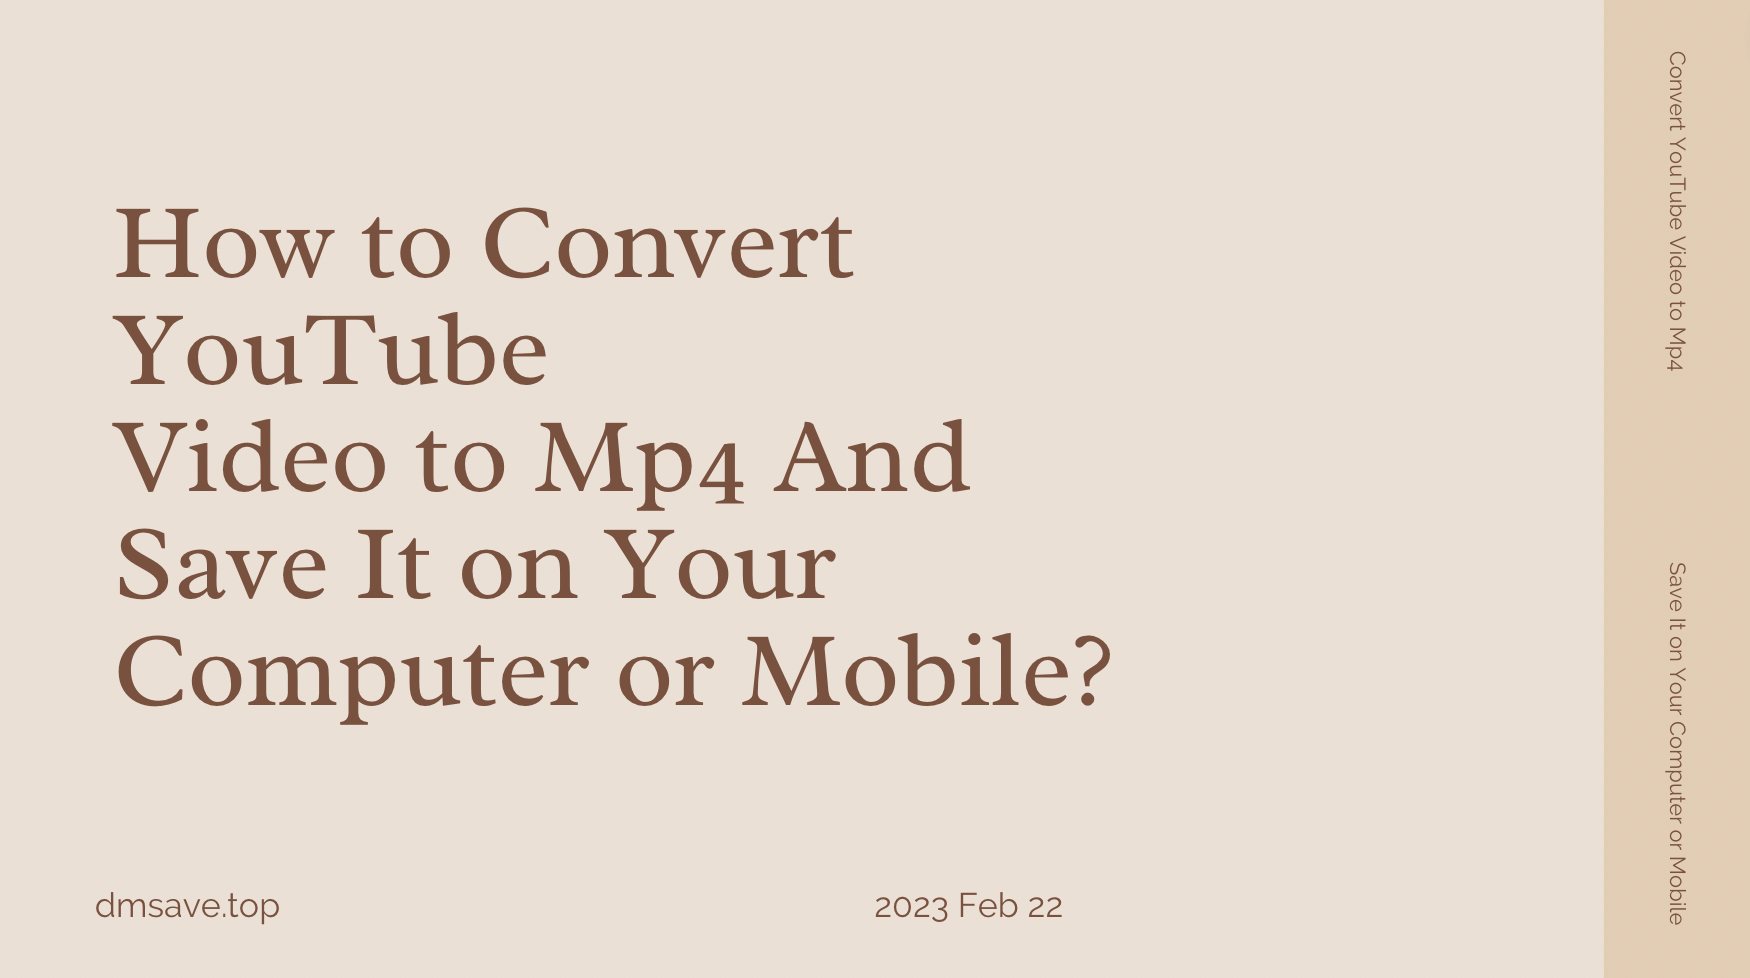 How to Convert YouTube Video to Mp4 And Save It on Your Computer or Mobile?